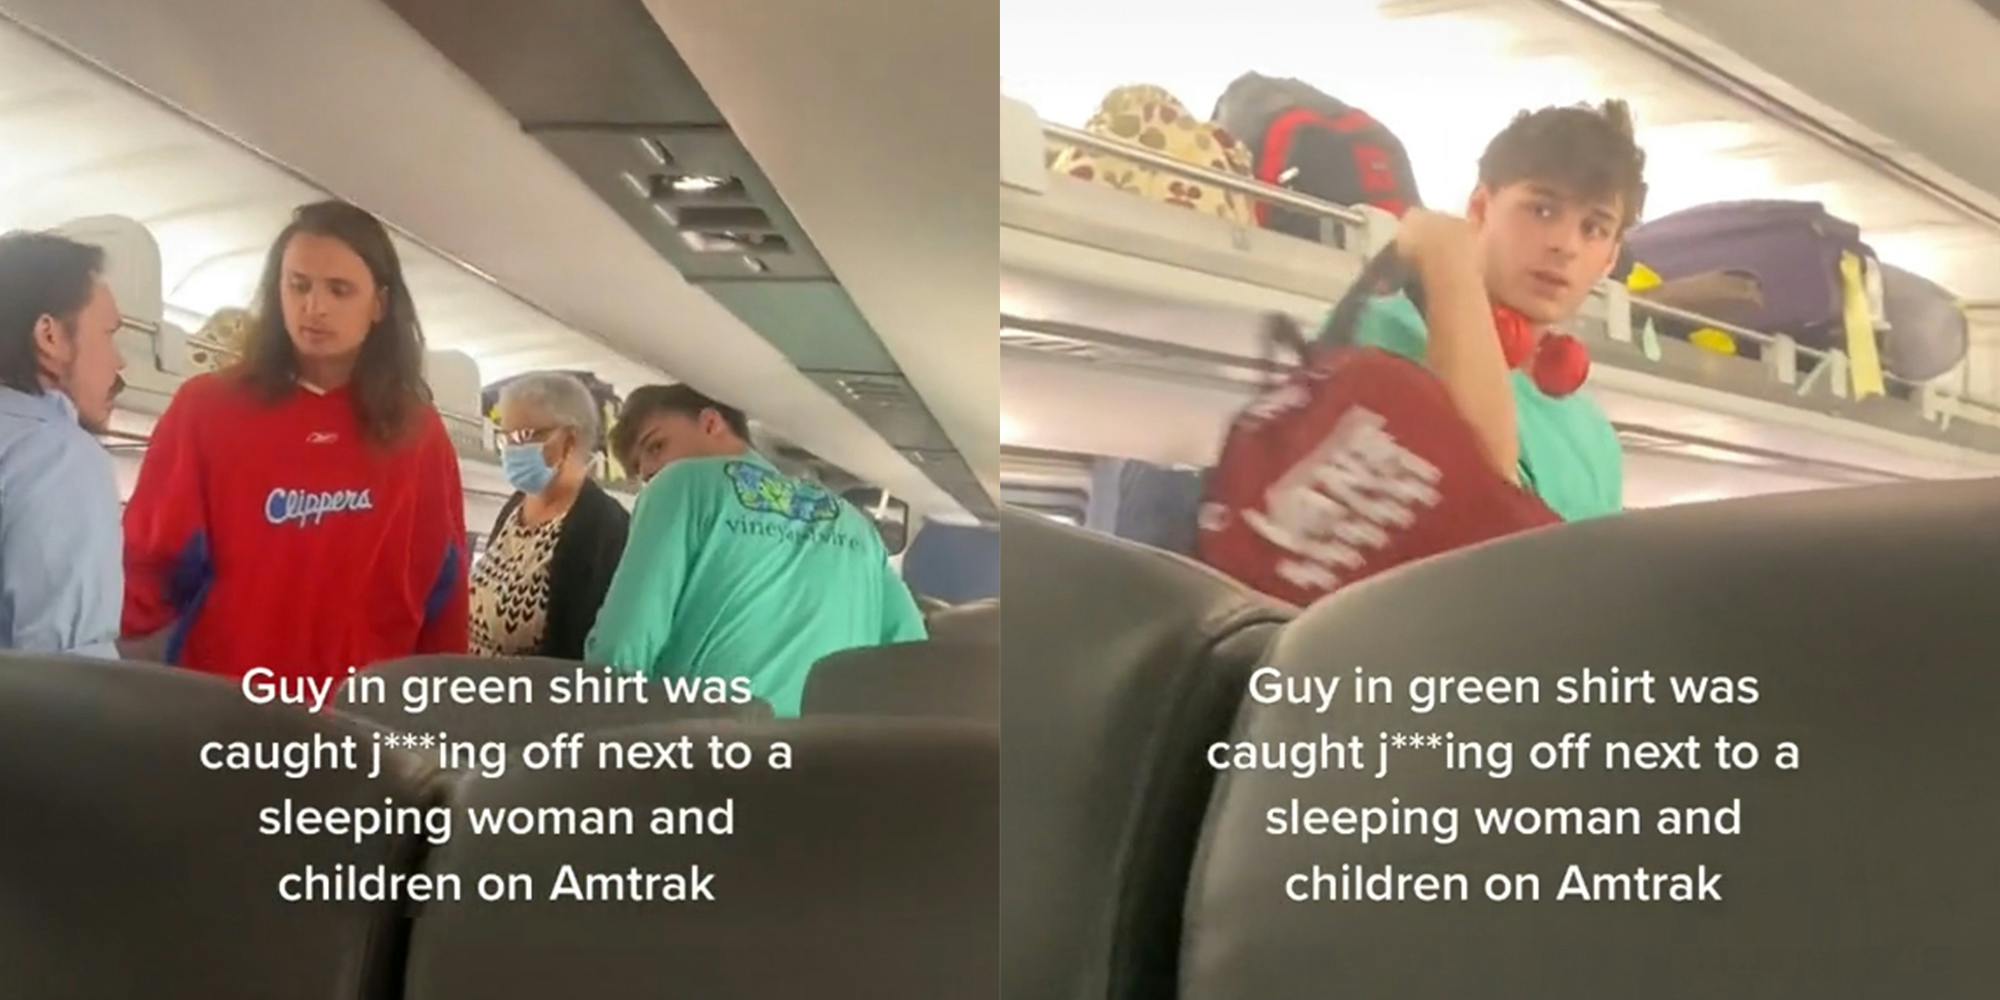 people on train with caption "Guy in green shirt was caught j***ing off next to a sleeping woman and children on Amtrak"